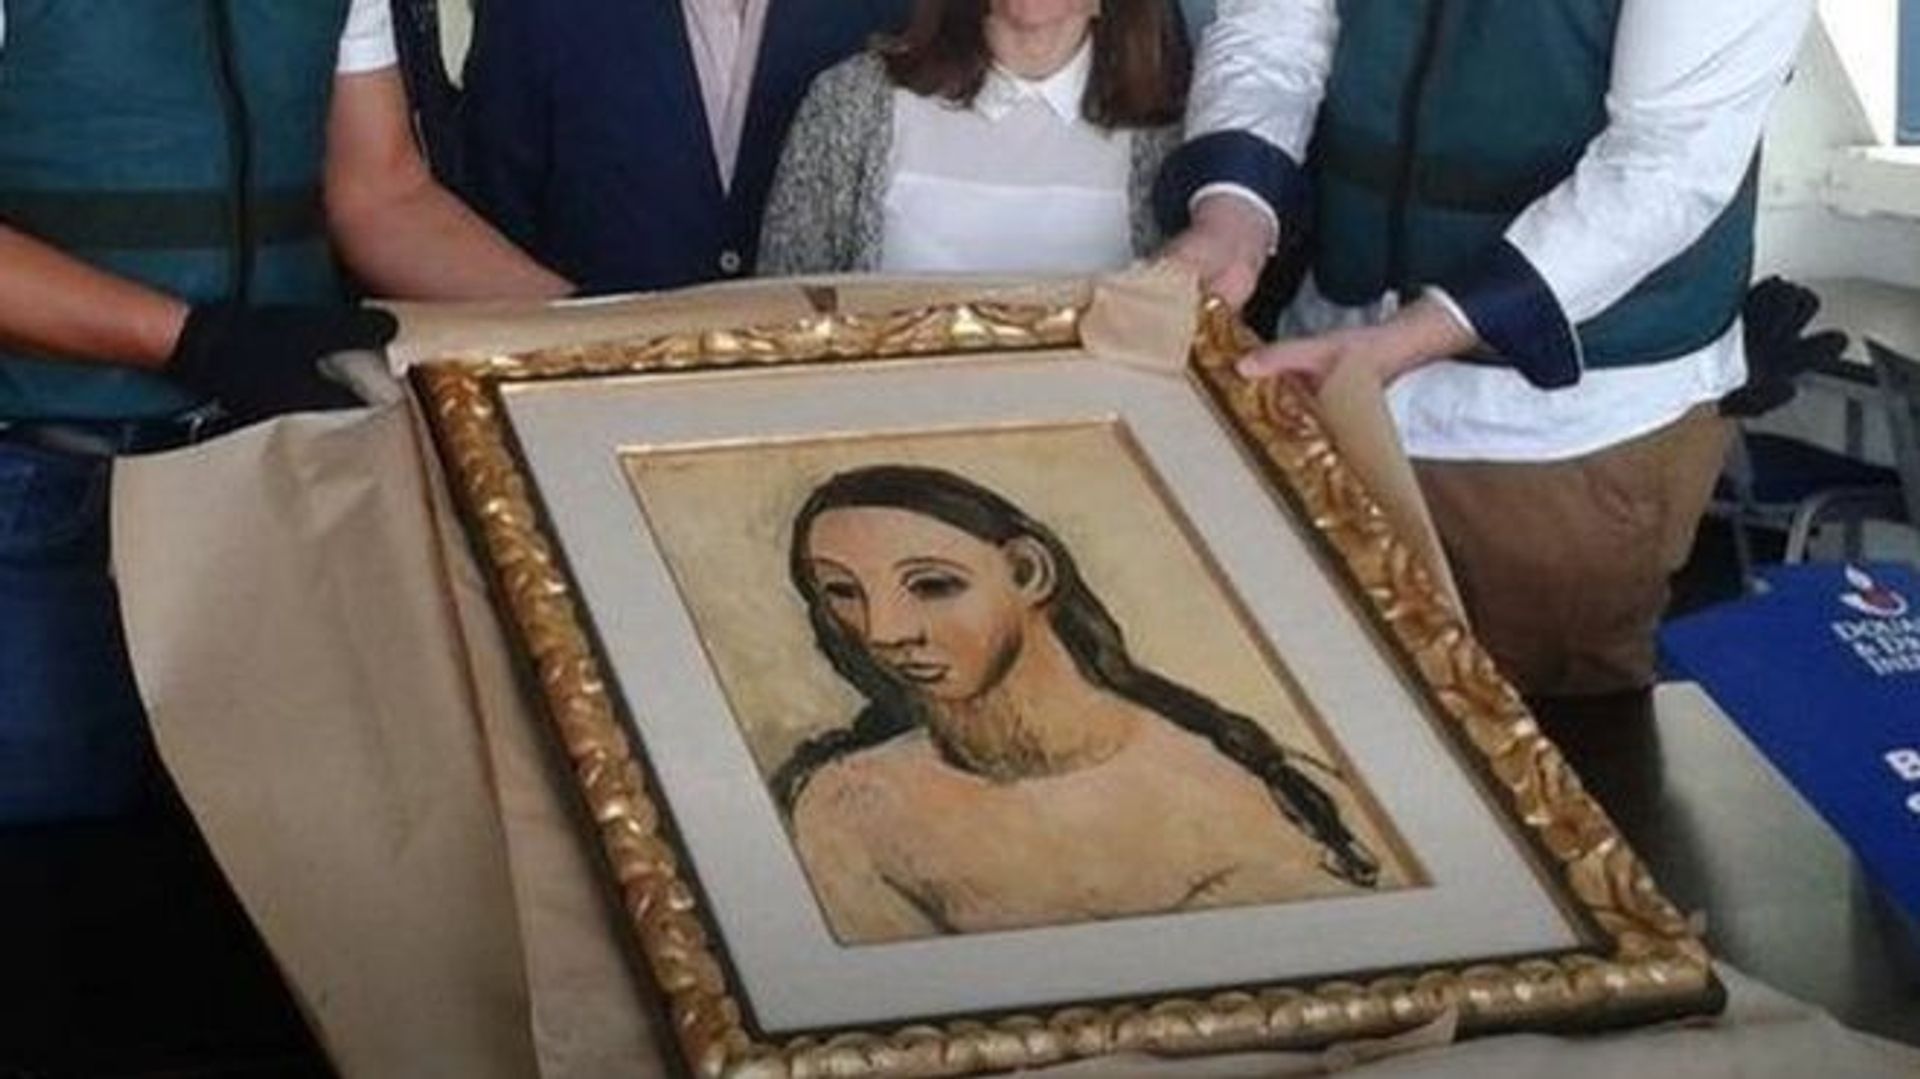 Picasso's Head of a Young Woman, declared a national treasure, was seized from Jaime Botin's yacht in France in 2015 Courtesy of Guardia Civil